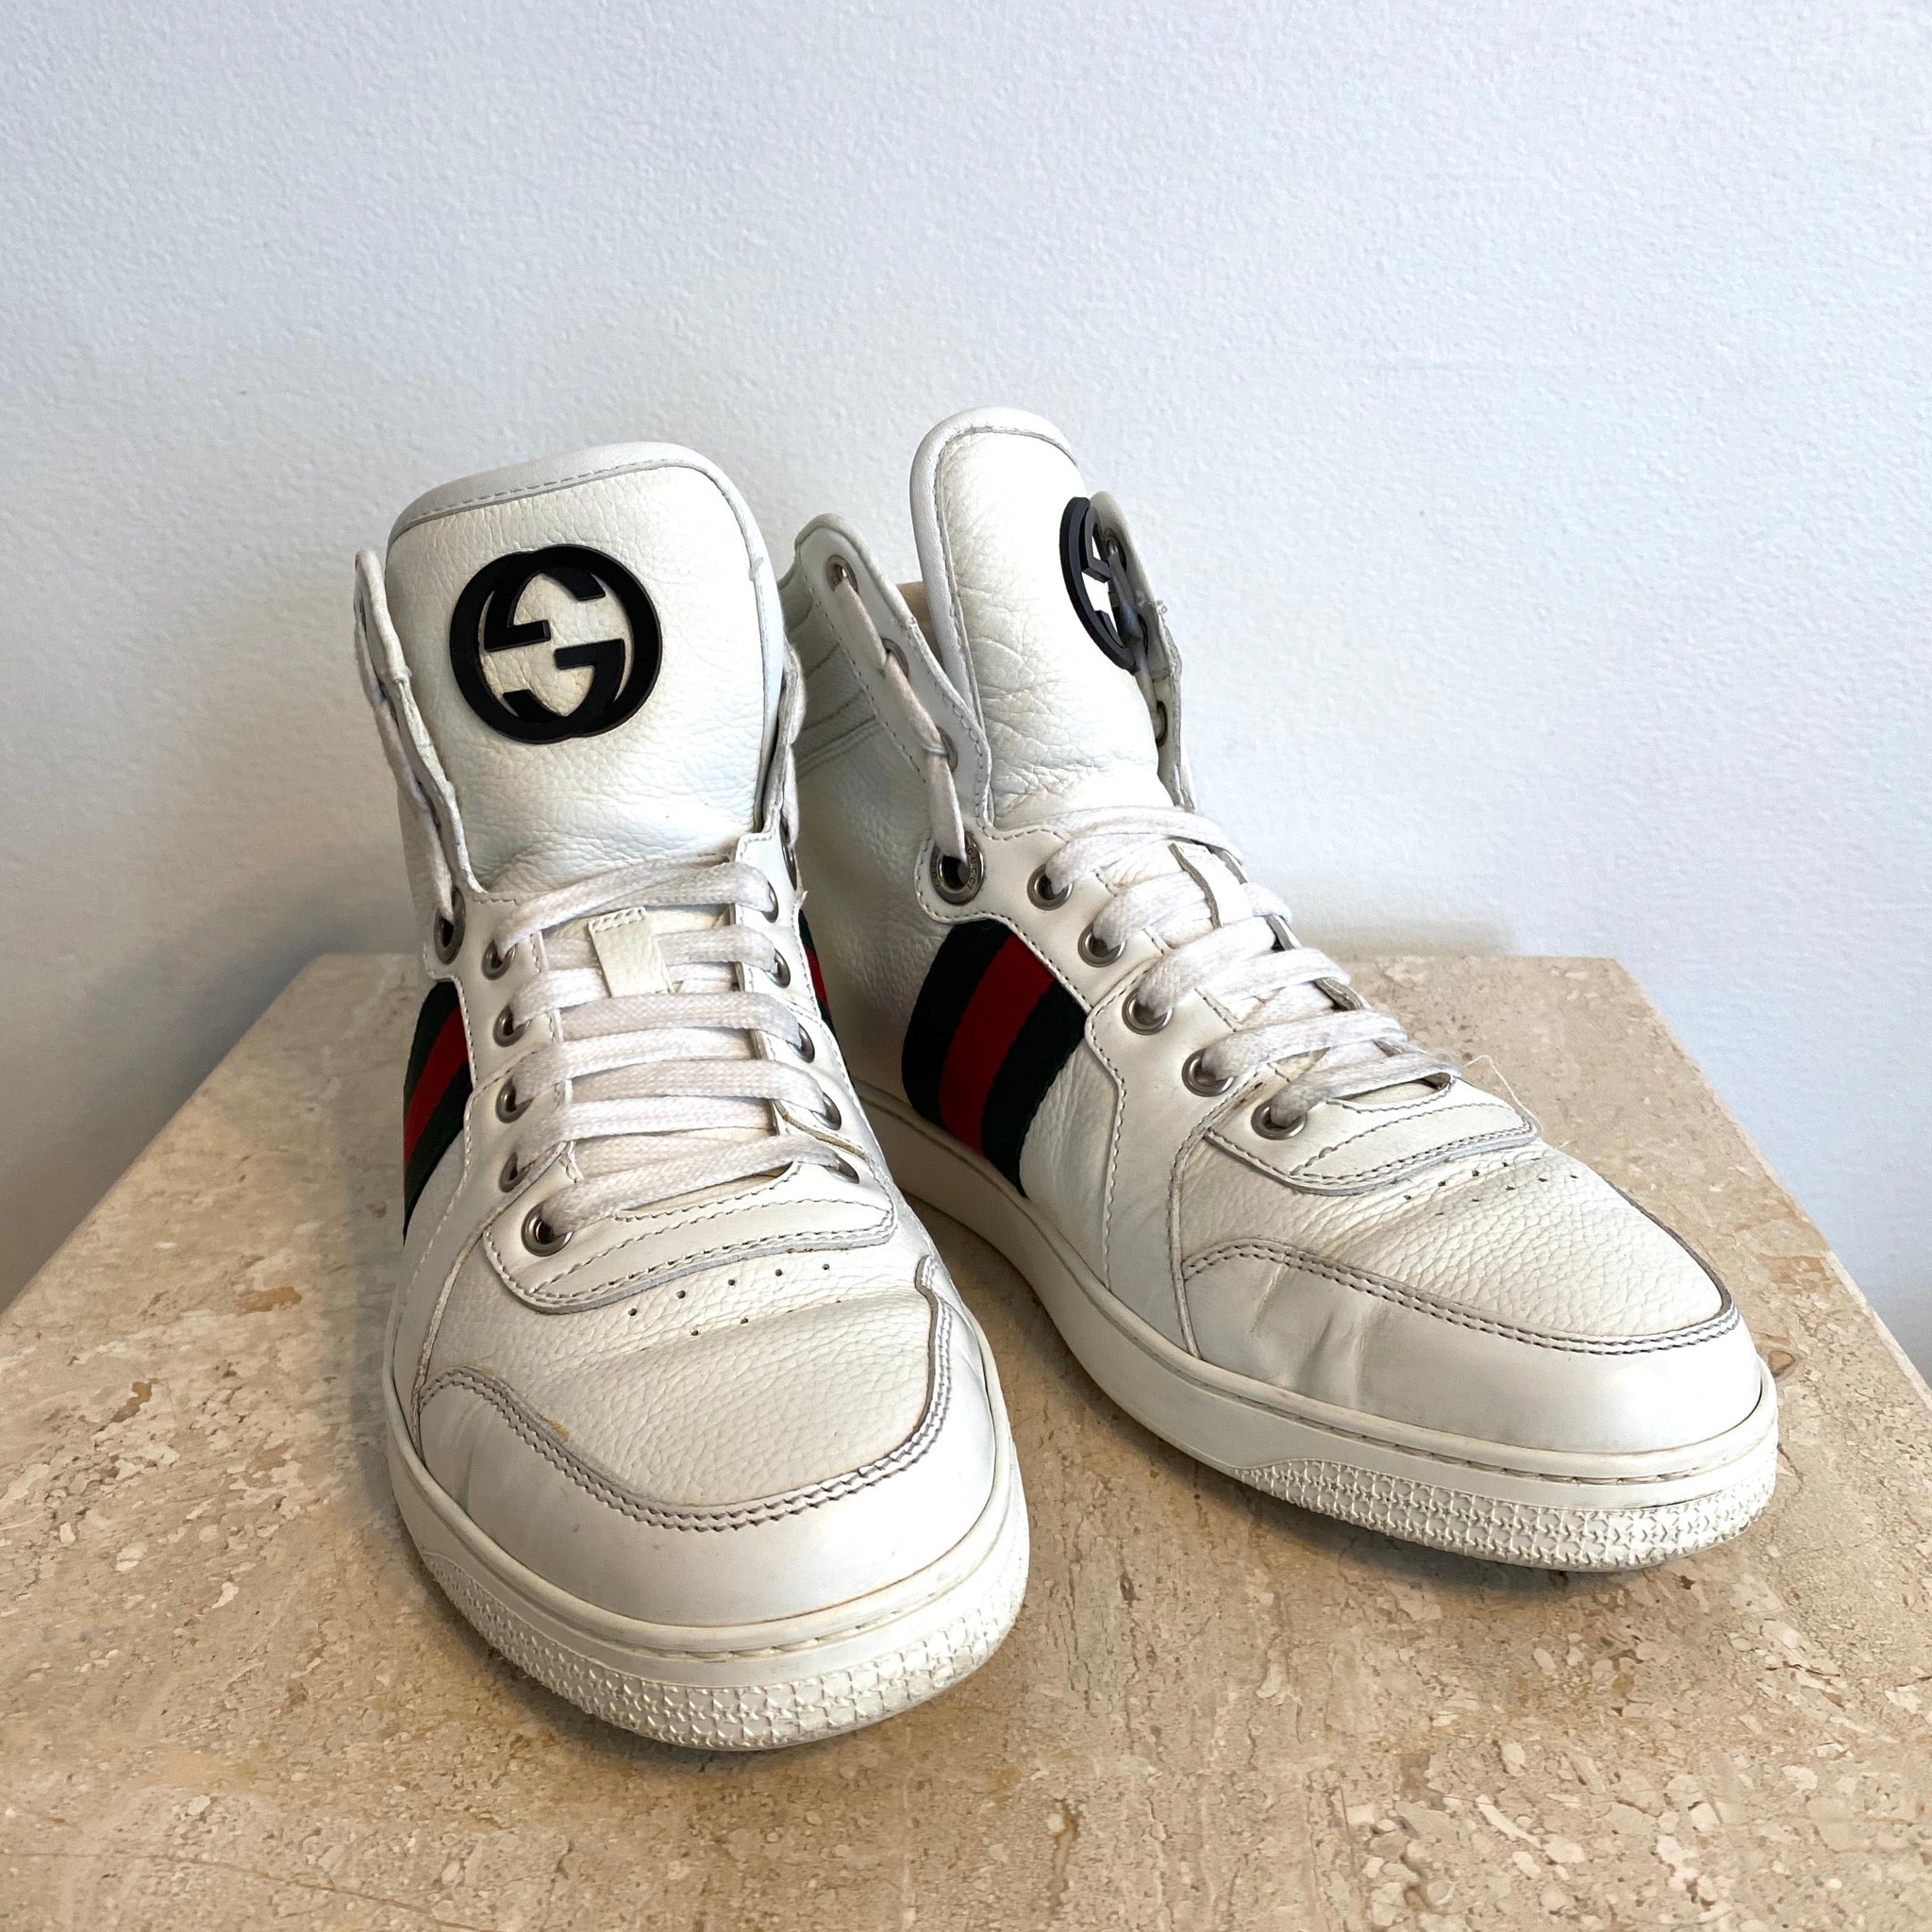 gucci high top sneakers white